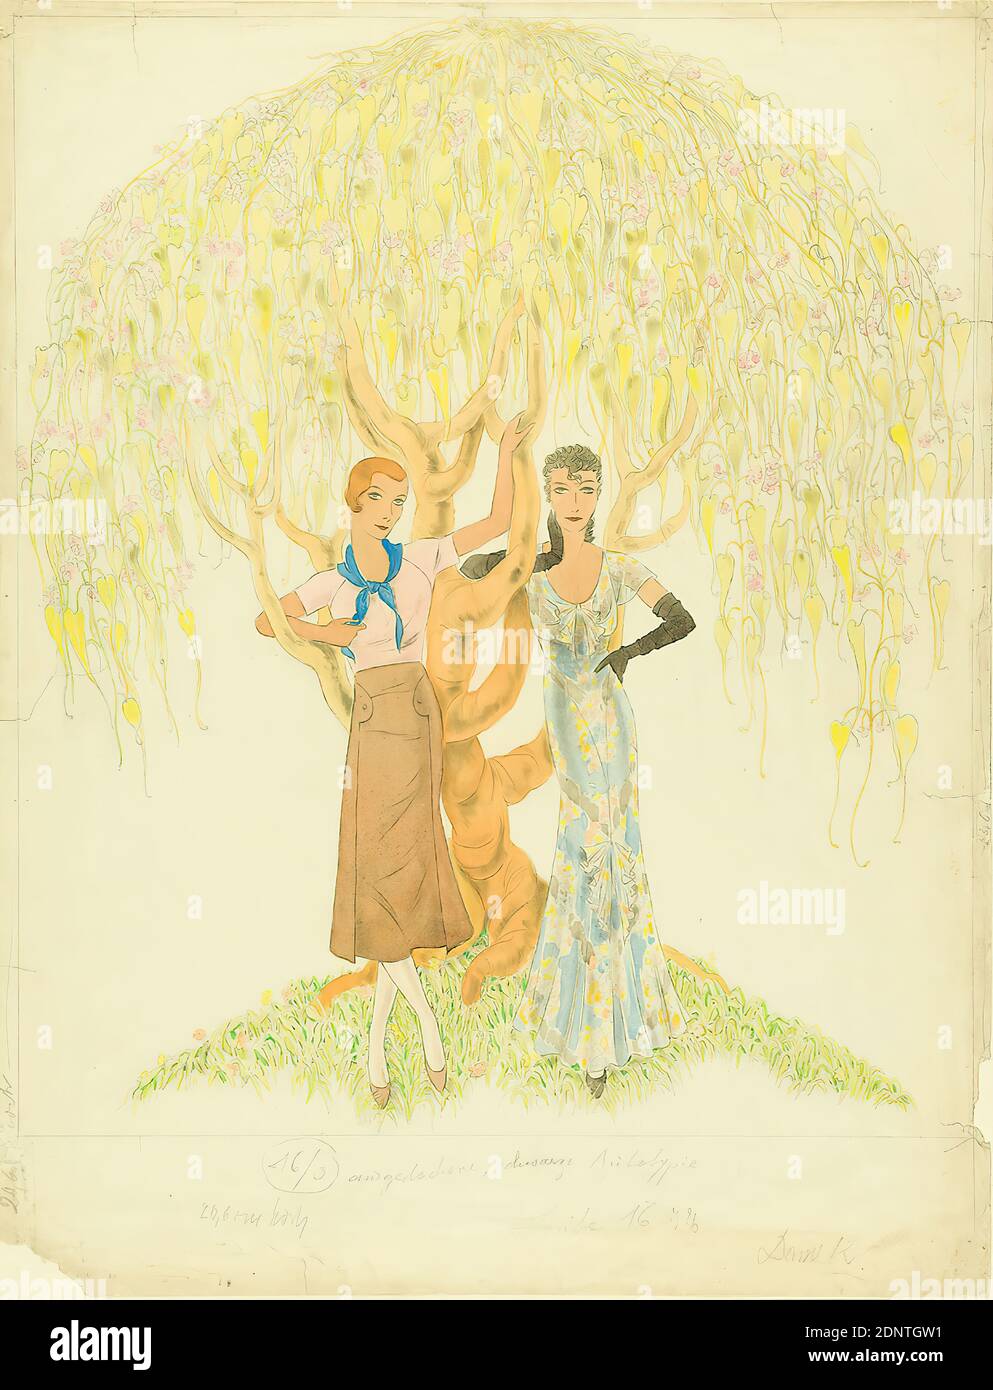 Ernst Dryden, fashion illustration for Die Dame, paper, non-opaque watercolor, pencil, watercolor, drawing, watercolor over lead, Total: Height: 64 cm; Width: 49 cm, drawing, graphics, illustrations, newspapers, magazines, trees, bushes, woman Stock Photo